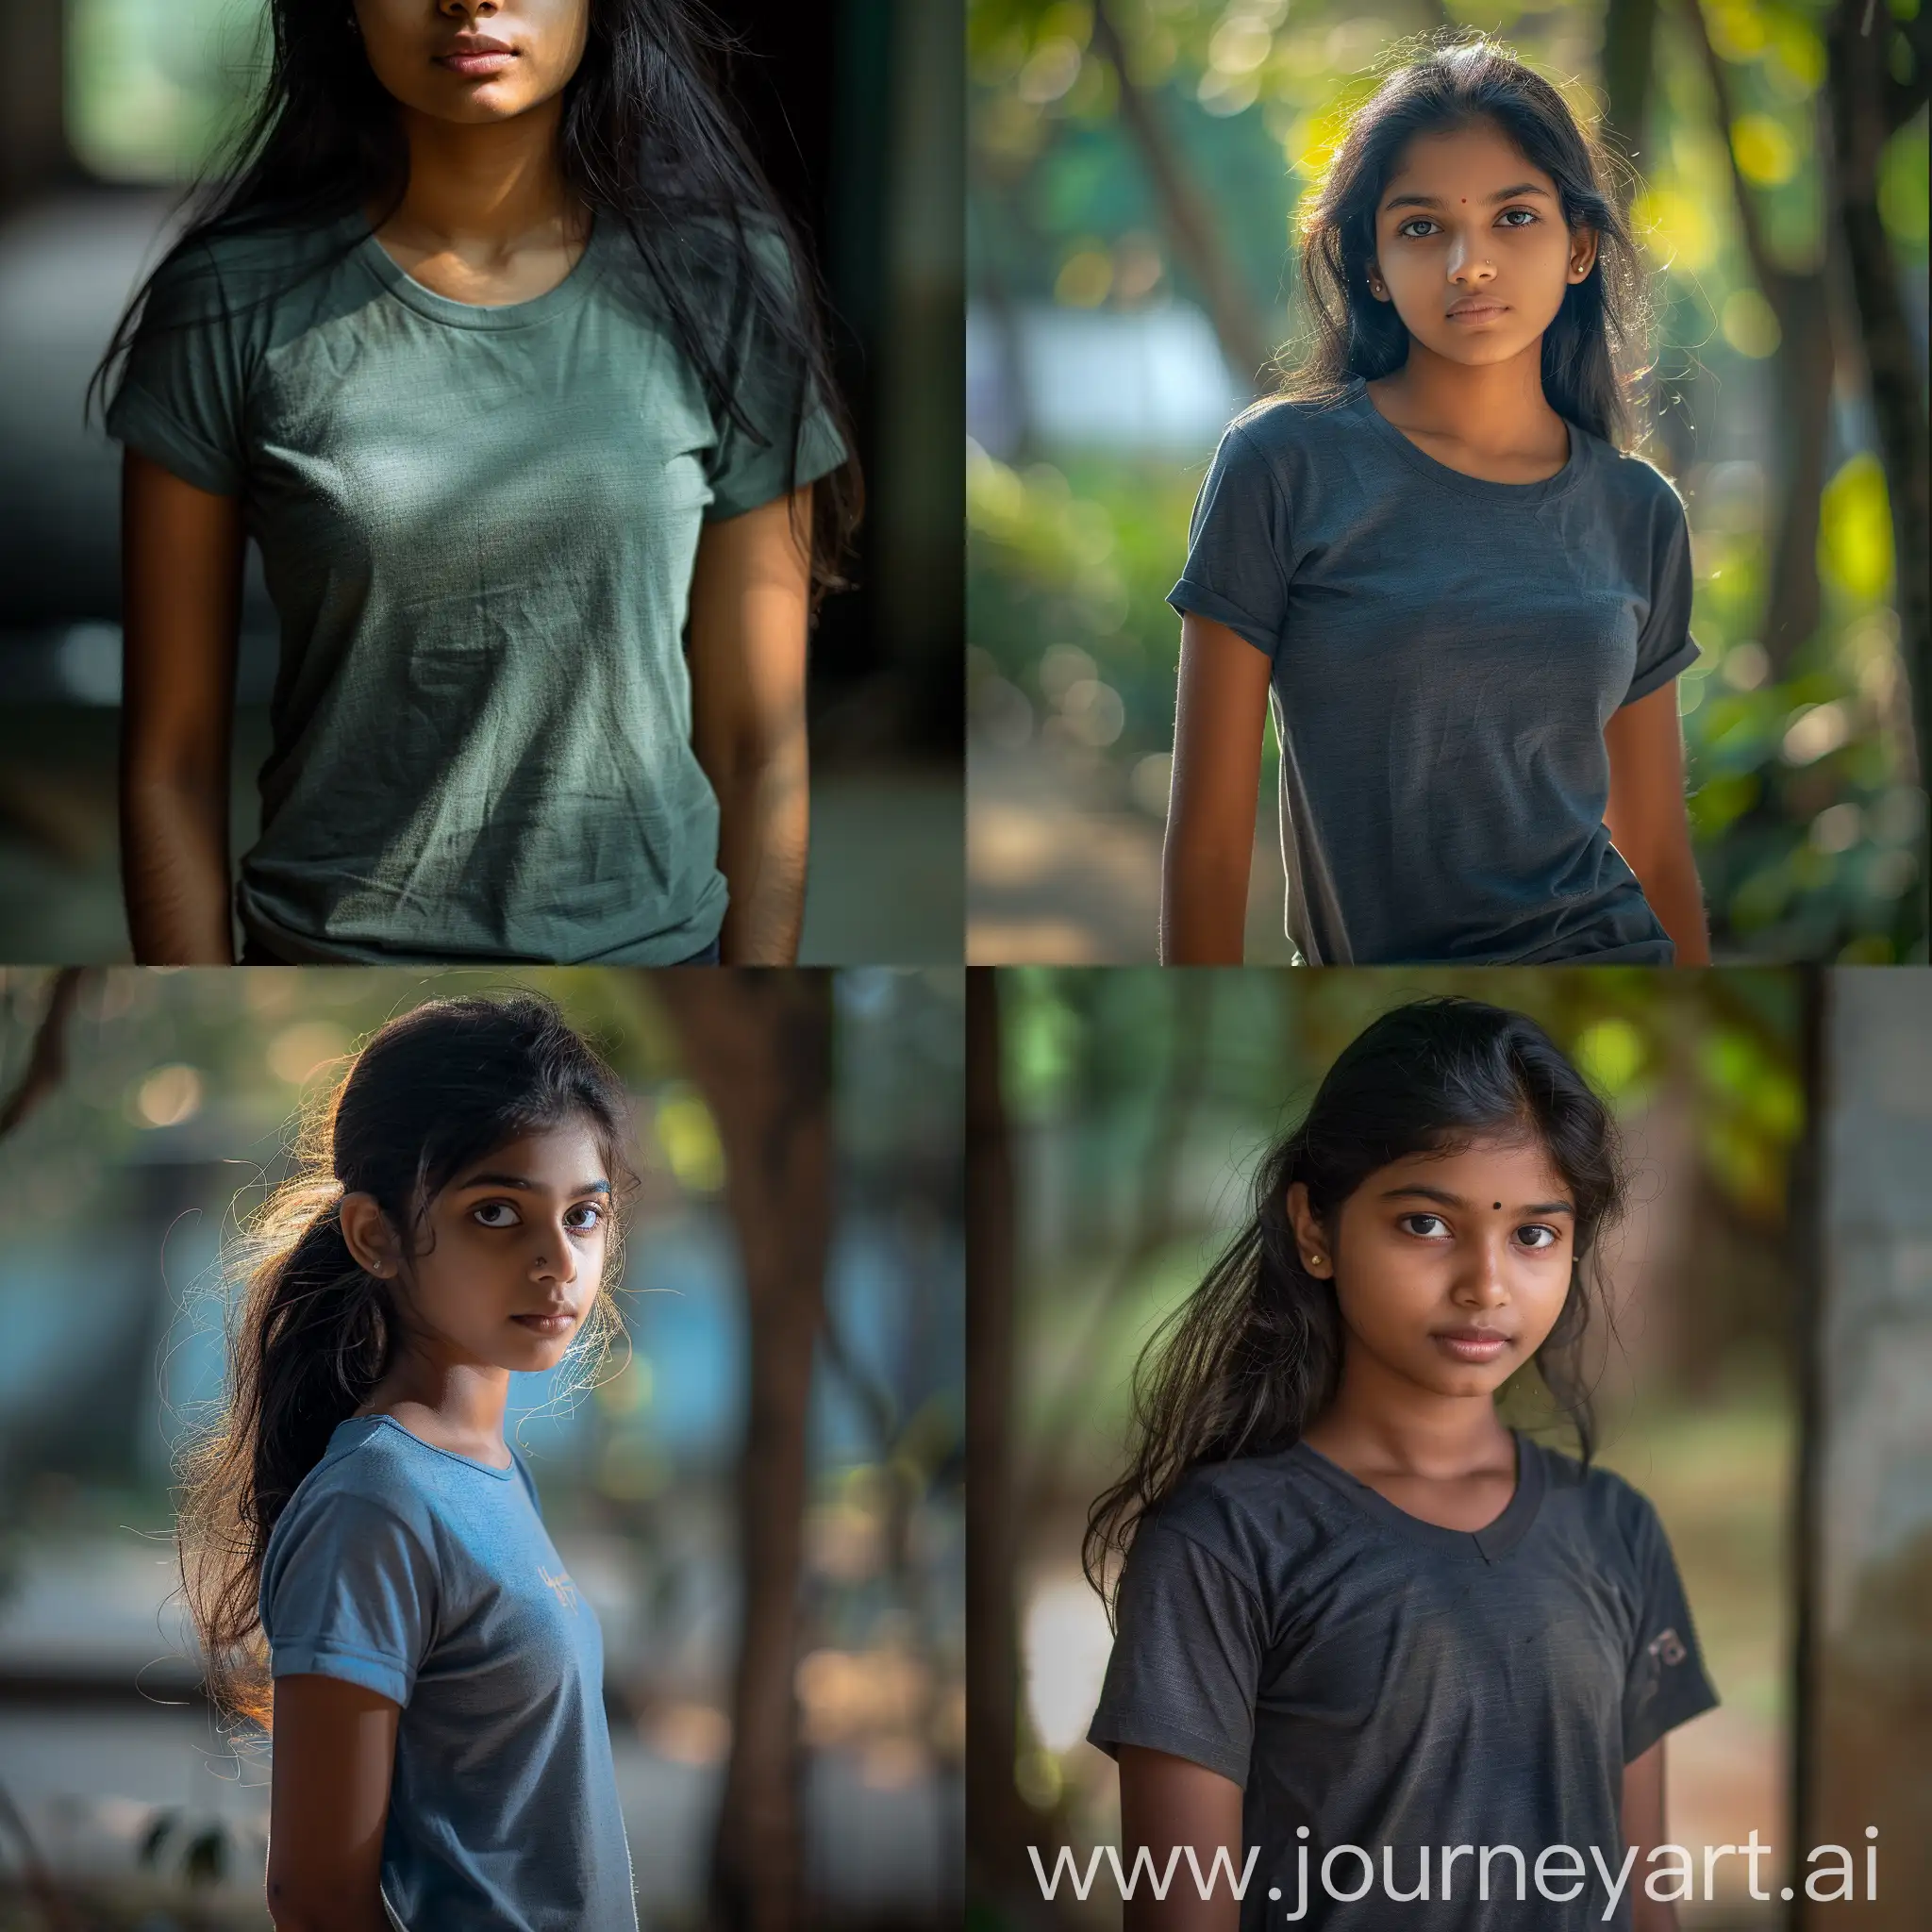 a very beautiful malayali 18 year old girl who is very attractive to the eye and mind wearing a t shirt, high definition, hd, hdr, 4k resolution, majesty shadow play, eye level, bokeh, highly detailed, best quality, RAW photo, full body shot, professional photography, bokeh, natural lighting, Canon lens, shot on a 64-megapixel DSLR camera, sharp focus, waist shot, half body shot.